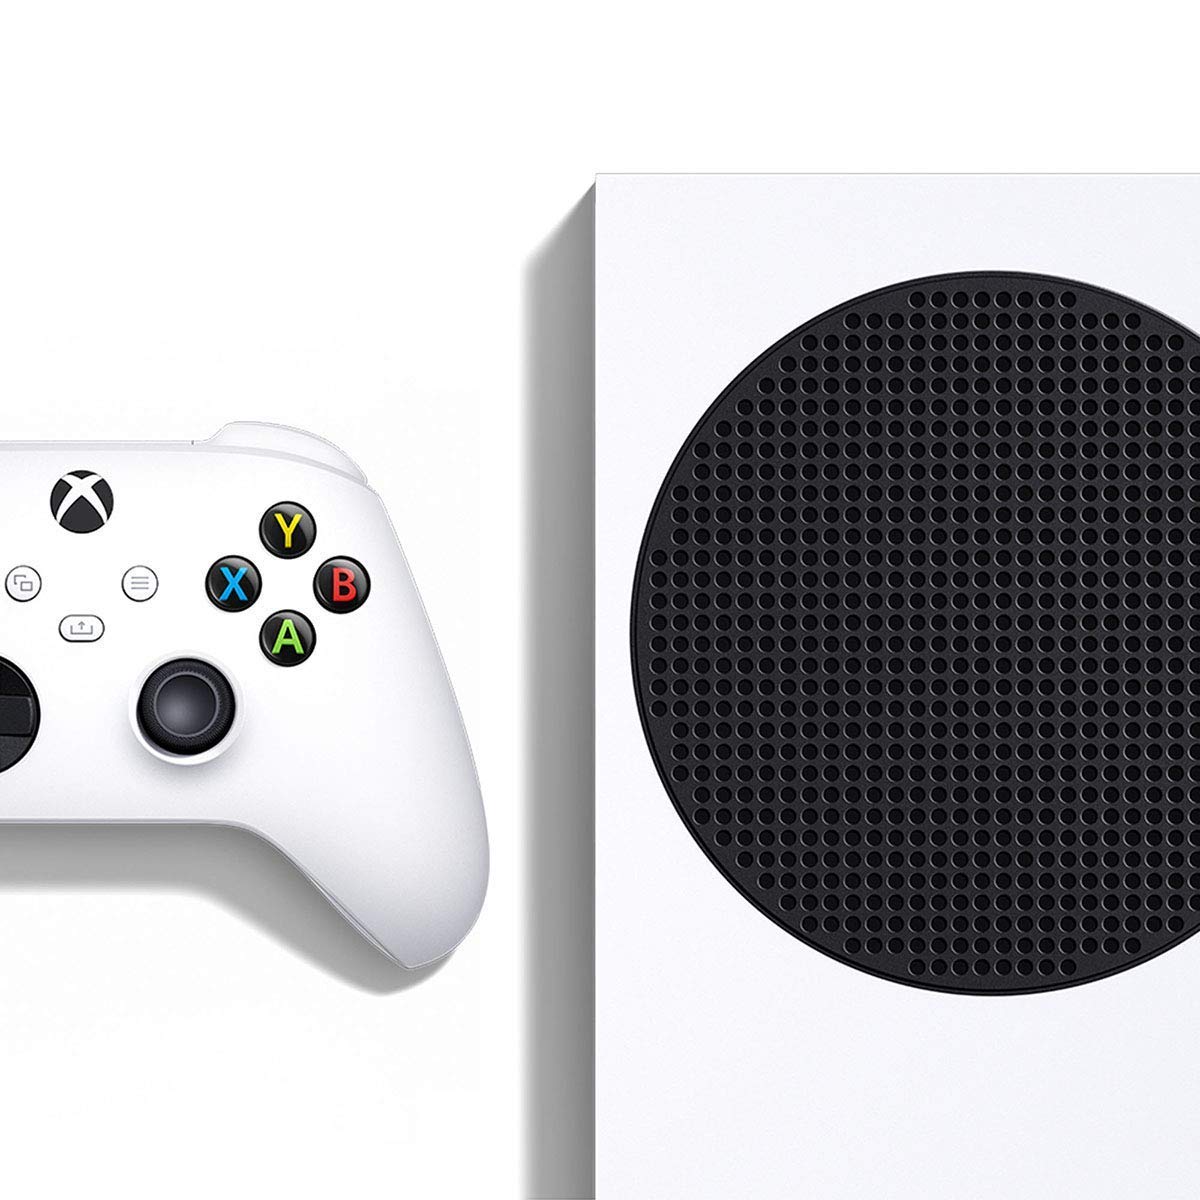 Microsoft Xbox Series S 512GB Game All-Digital Console + 1 Xbox Wireless1 Controller, White - 1440p Gaming Resolution, 4K Streaming Media Playback, WiFi (Refurbished)